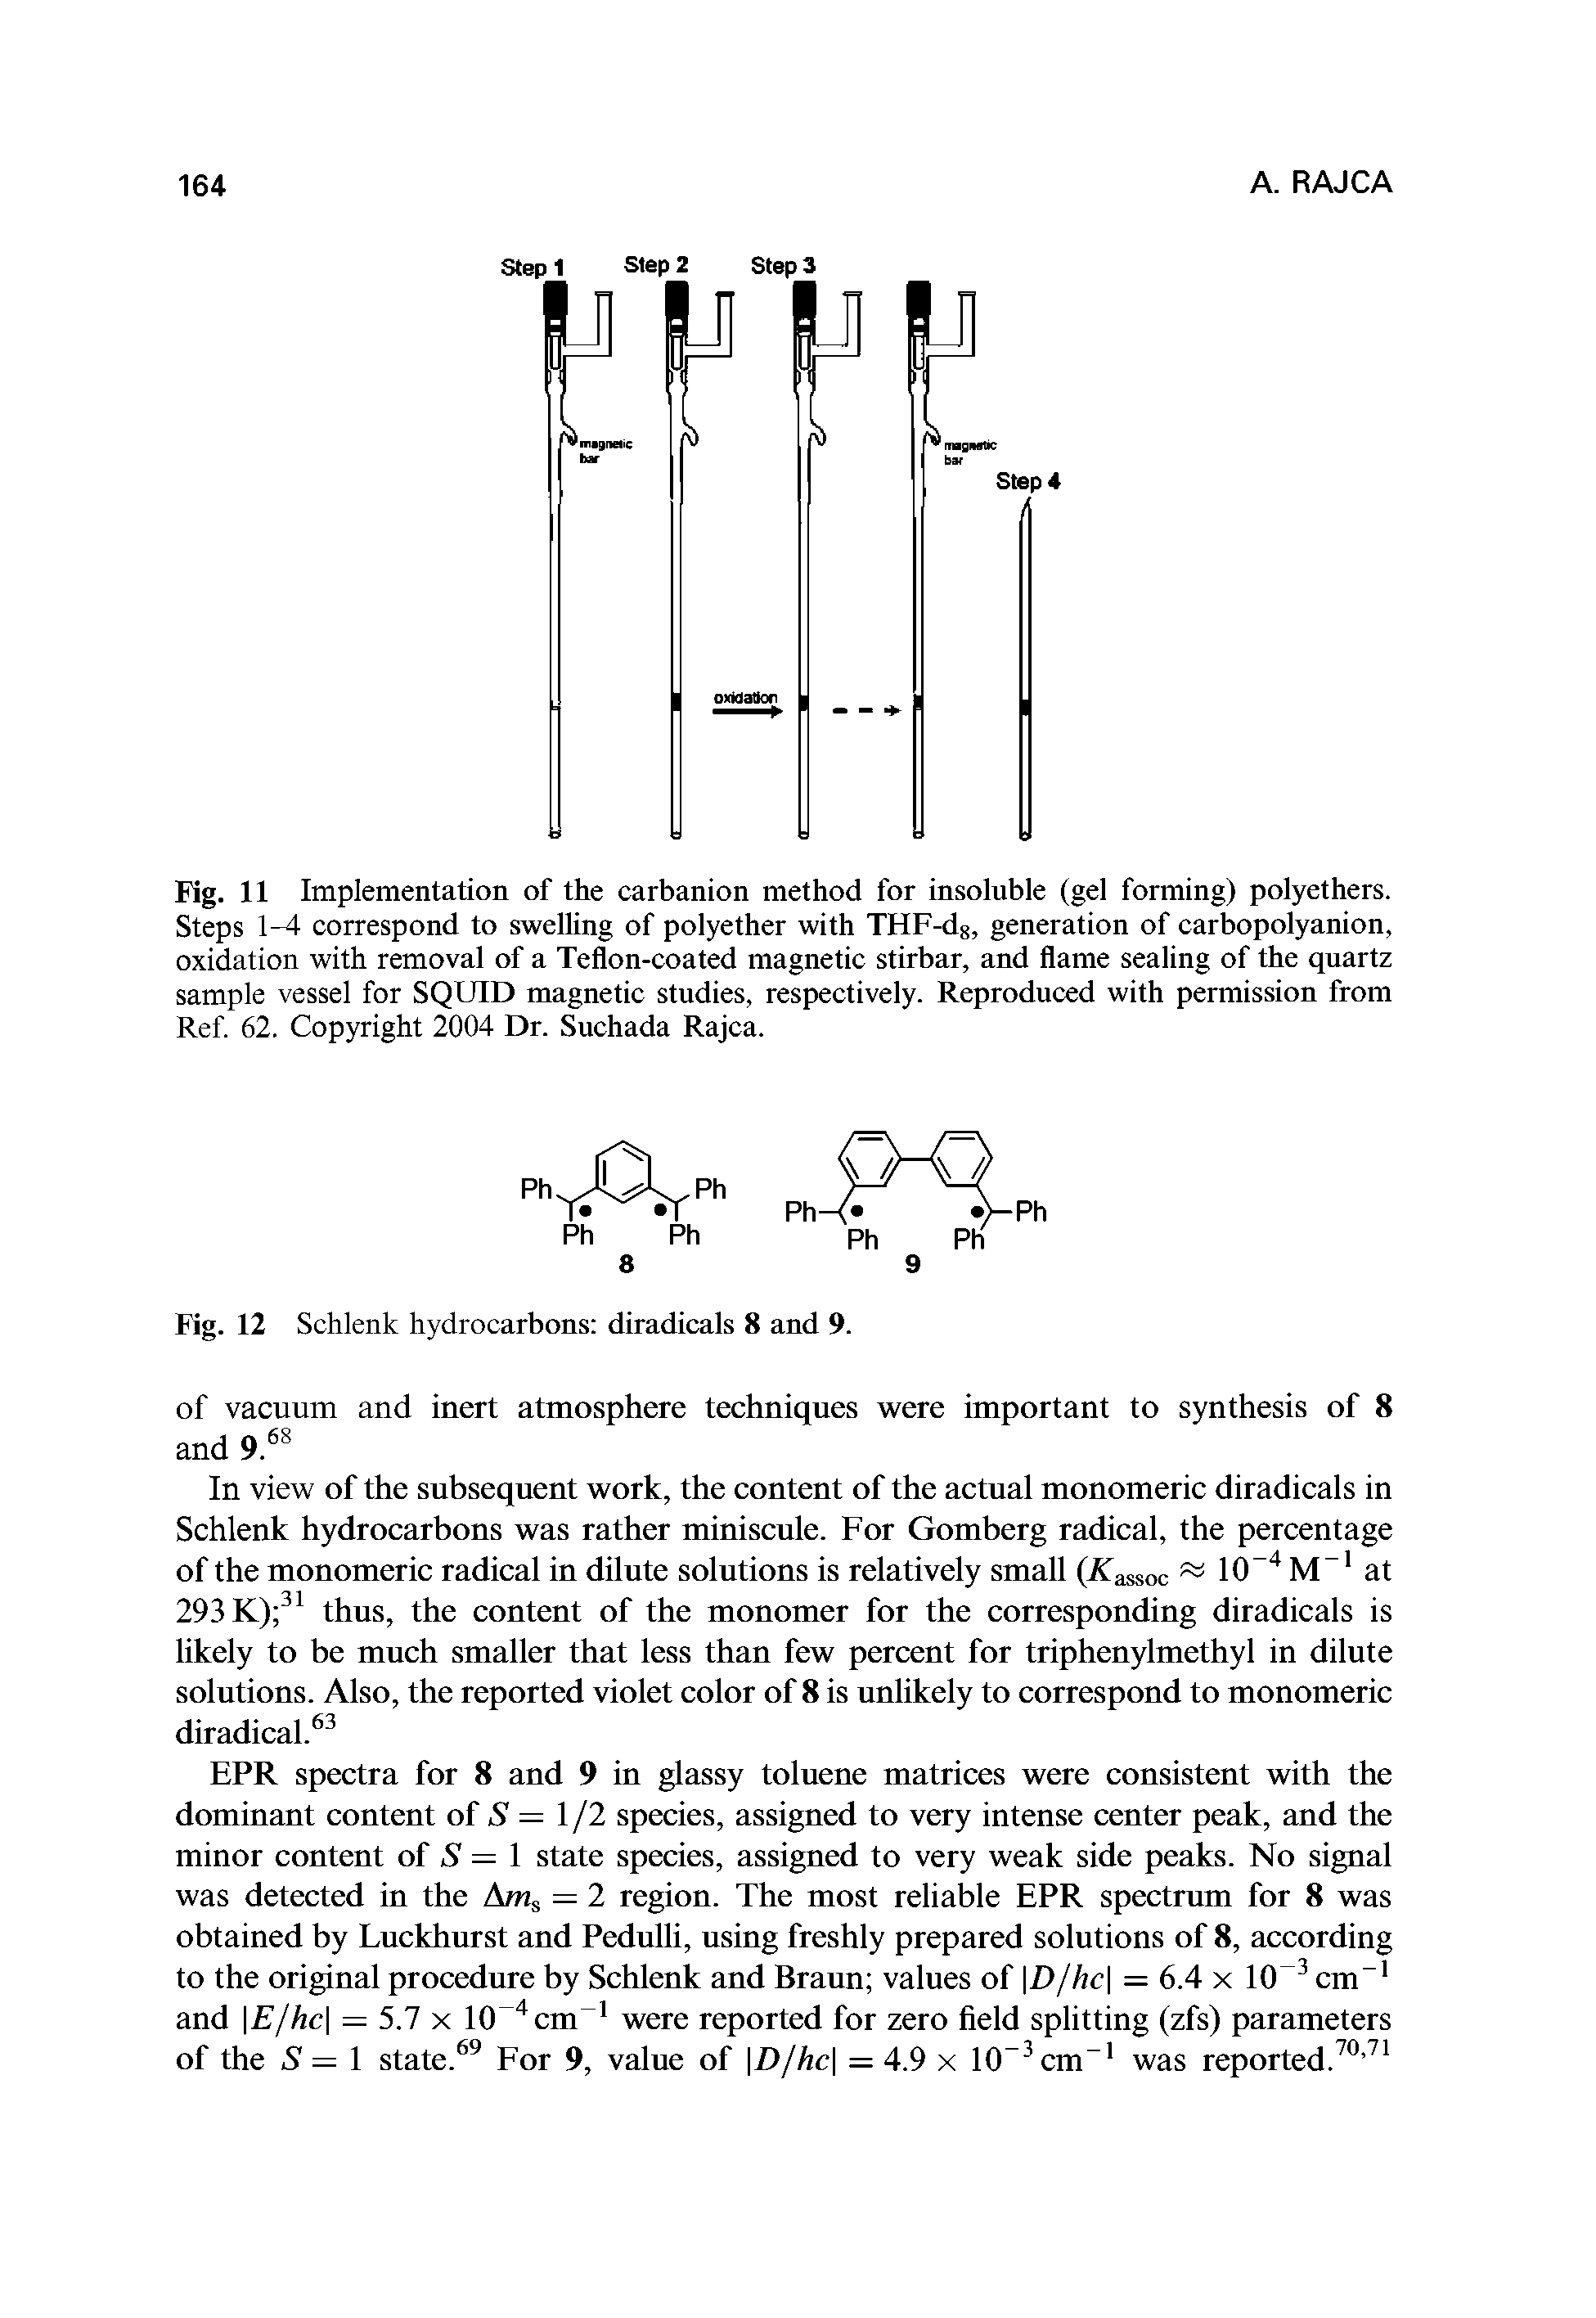 Fig. 11 Implementation of the carbanion method for insoluble (gel forming) polyethers. Steps 1-4 correspond to swelling of polyether with THF-d8, generation of carbopolyanion, oxidation with removal of a Teflon-coated magnetic stirbar, and flame sealing of the quartz sample vessel for SQUID magnetic studies, respectively. Reproduced with permission from Ref. 62. Copyright 2004 Dr. Suchada Rajca.